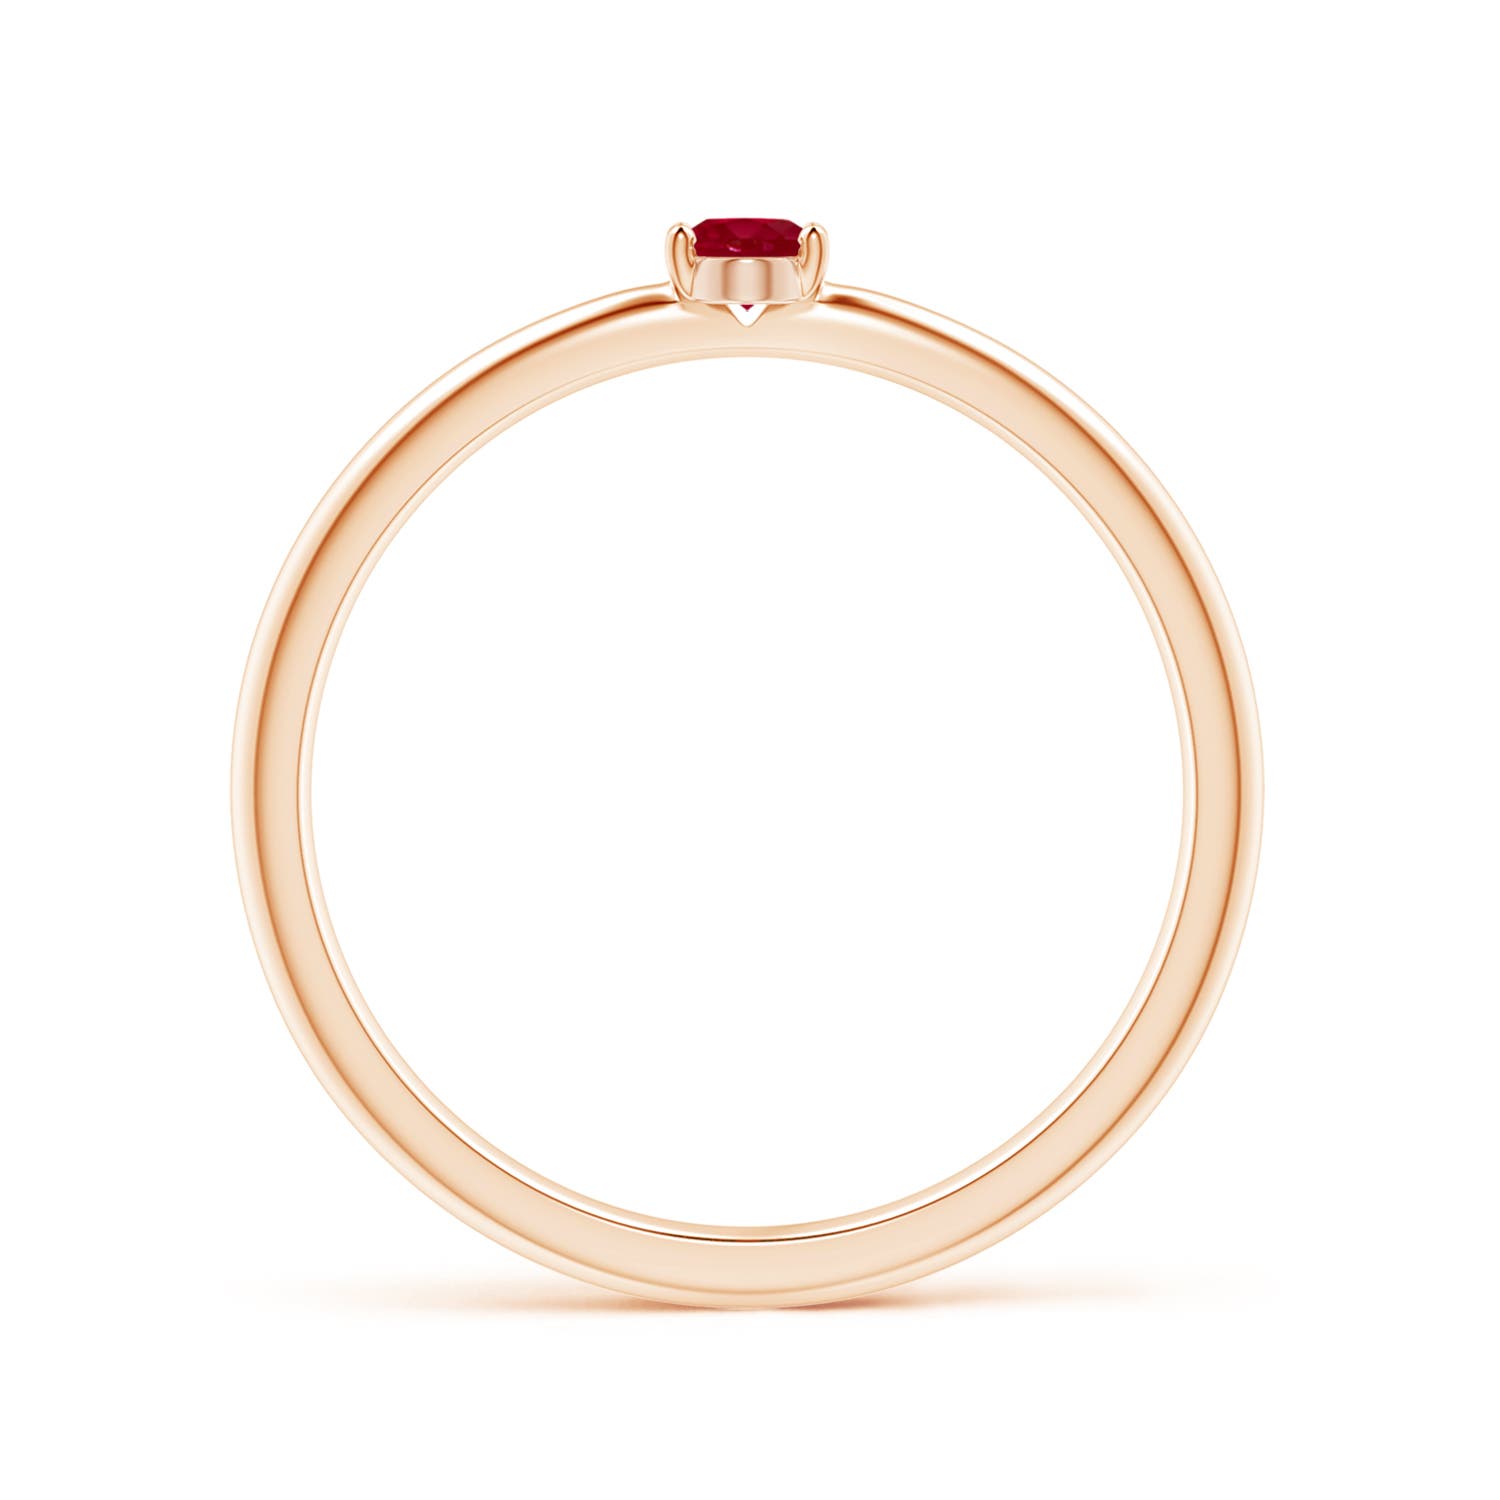 AA - Ruby / 0.2 CT / 14 KT Rose Gold